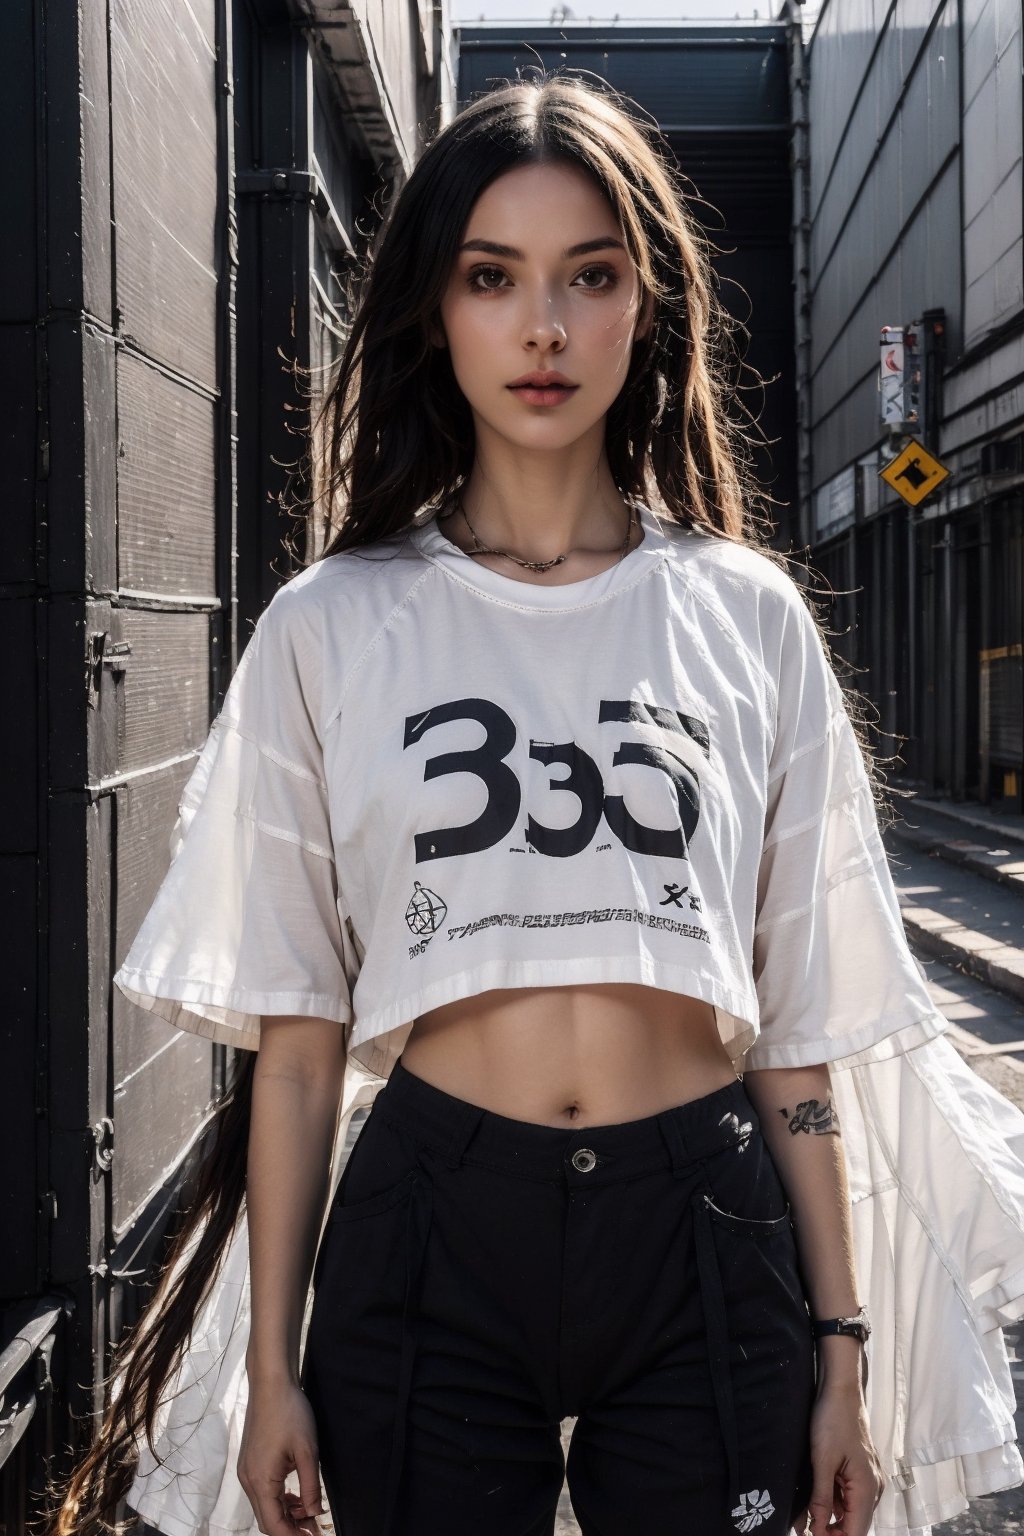 1girl,young white girl,hot top model,long blonde hair,wearing a white long oversize t shirt (t shirt only white color) and Acronym J36-S black pants and Acronym P30A-DS and black and white sneakers,in city,instagram model,80mm,urban techwear,blurry_light_background,tattoo,nipple piercing,girl